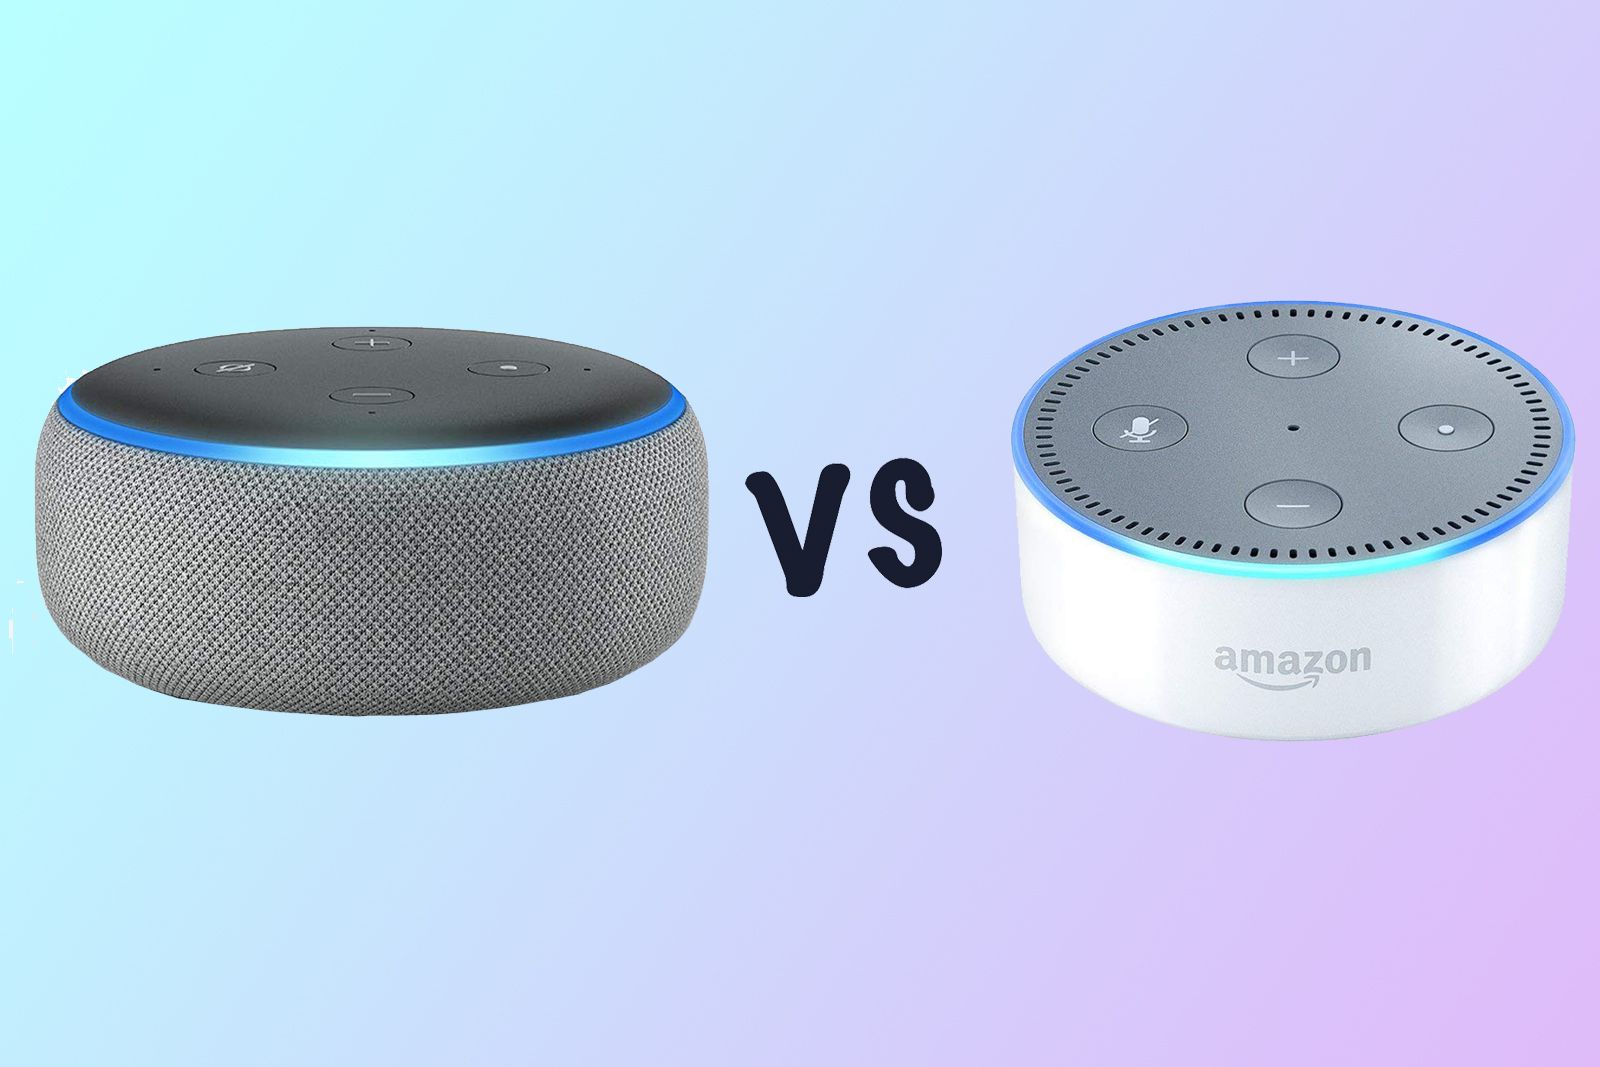 New Amazon Echo Dot vs old Echo Dot Whats the difference image 1